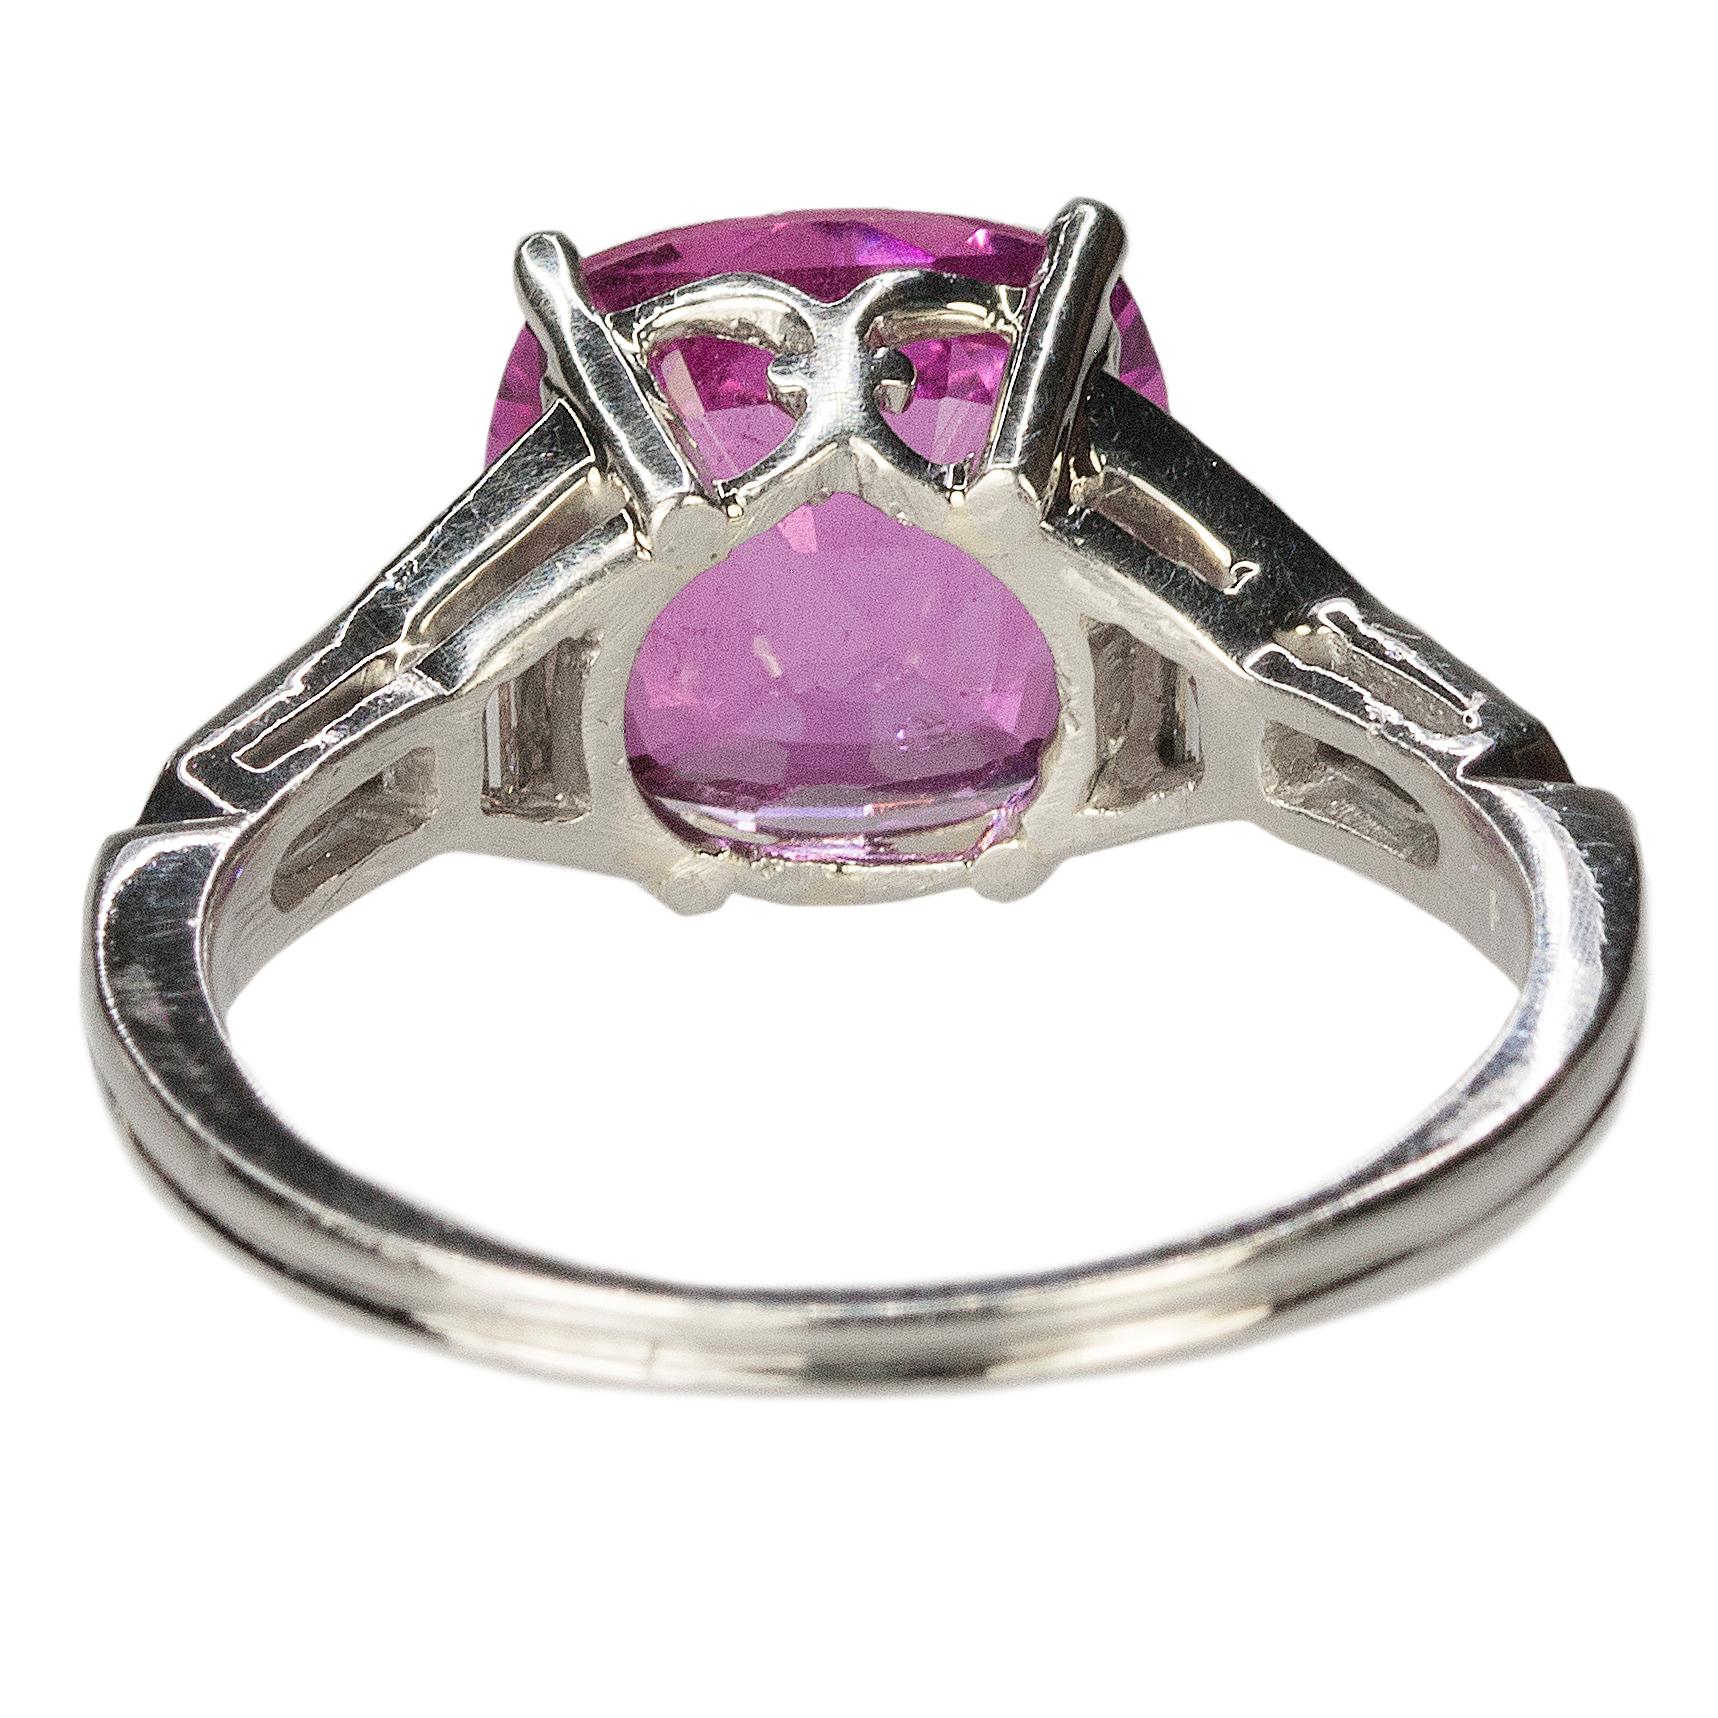 Platinum Art Deco Ring with Pink Sapphire 1